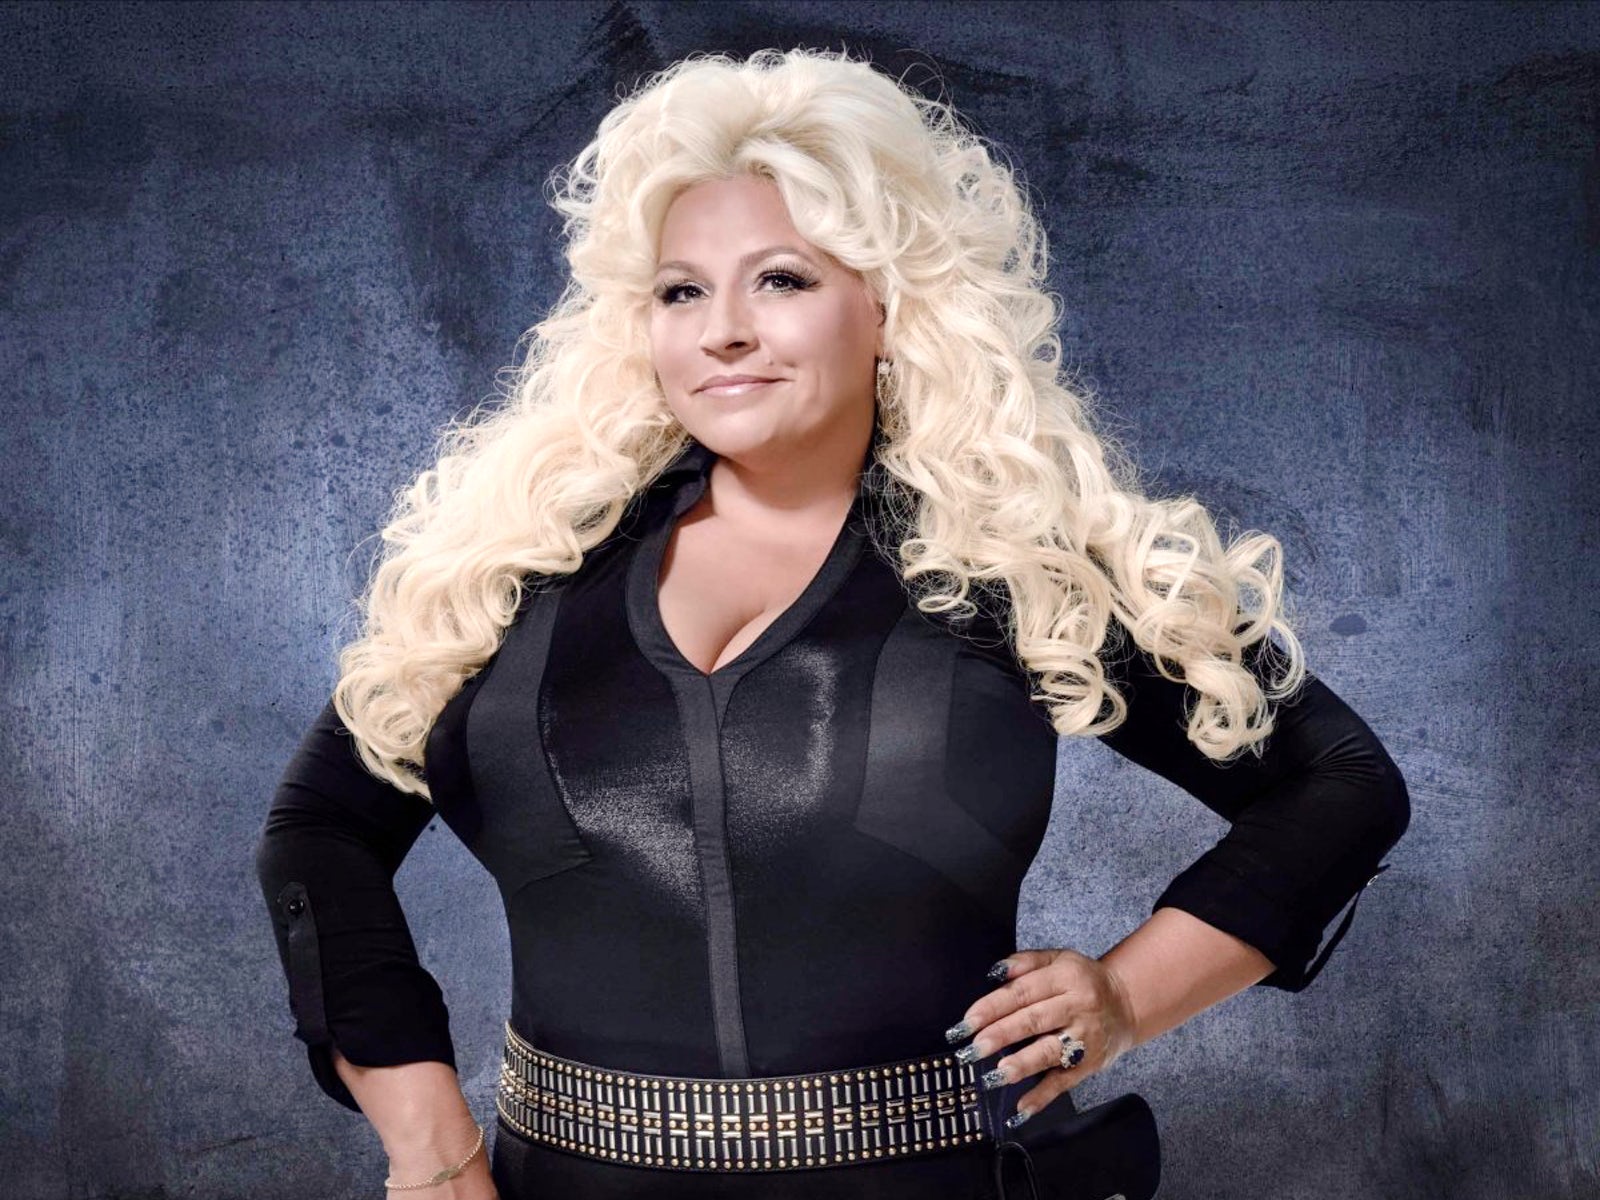 Dog the Bounty Hunter mourns his wife Beth Chapman's death: "...